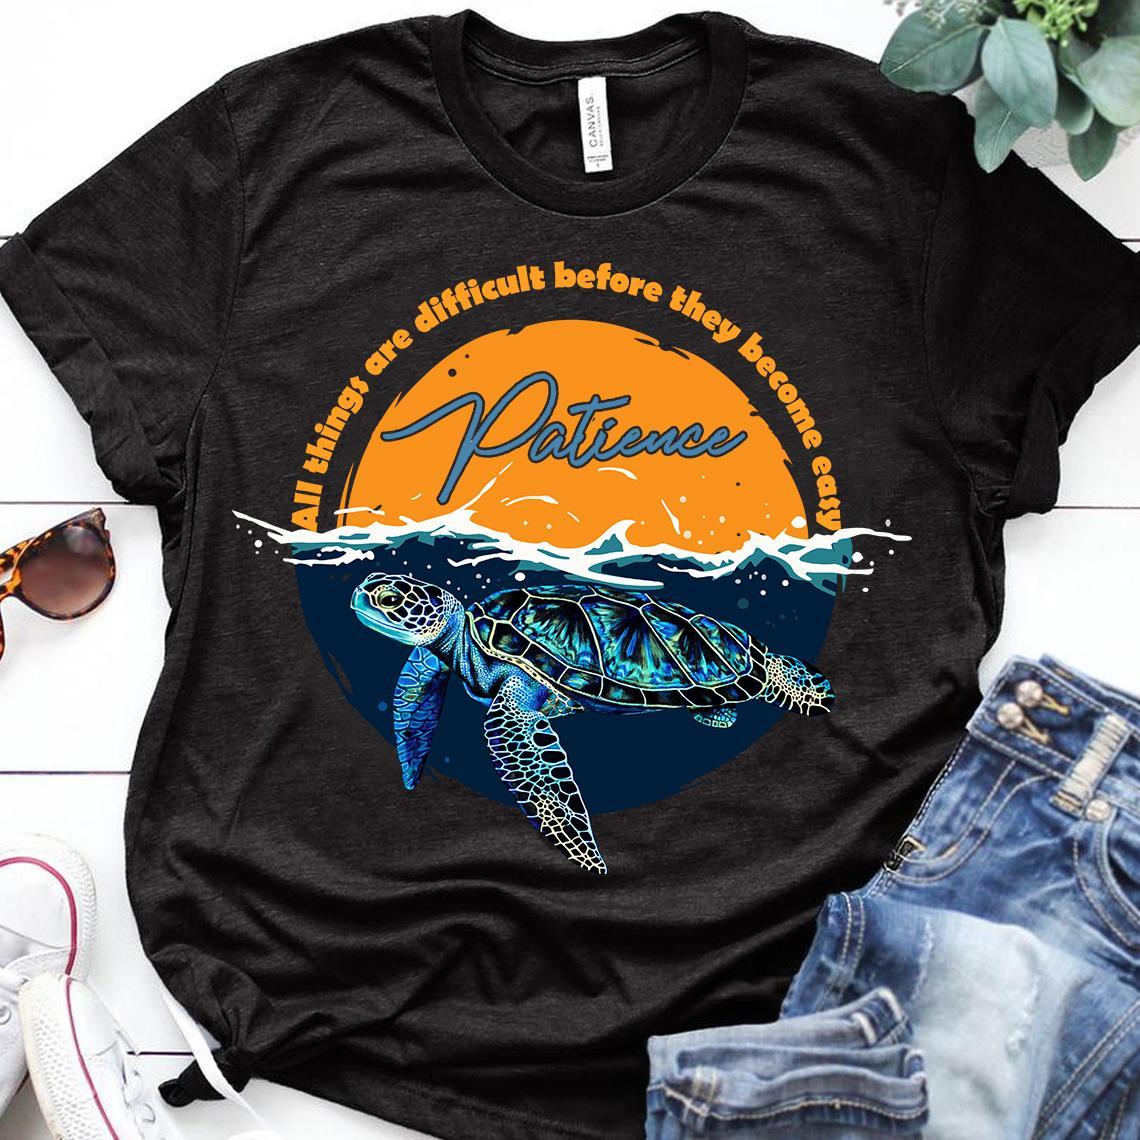 All things are difficult before they become easy - Ocean turtle, ocean turtle graphic T-shirt